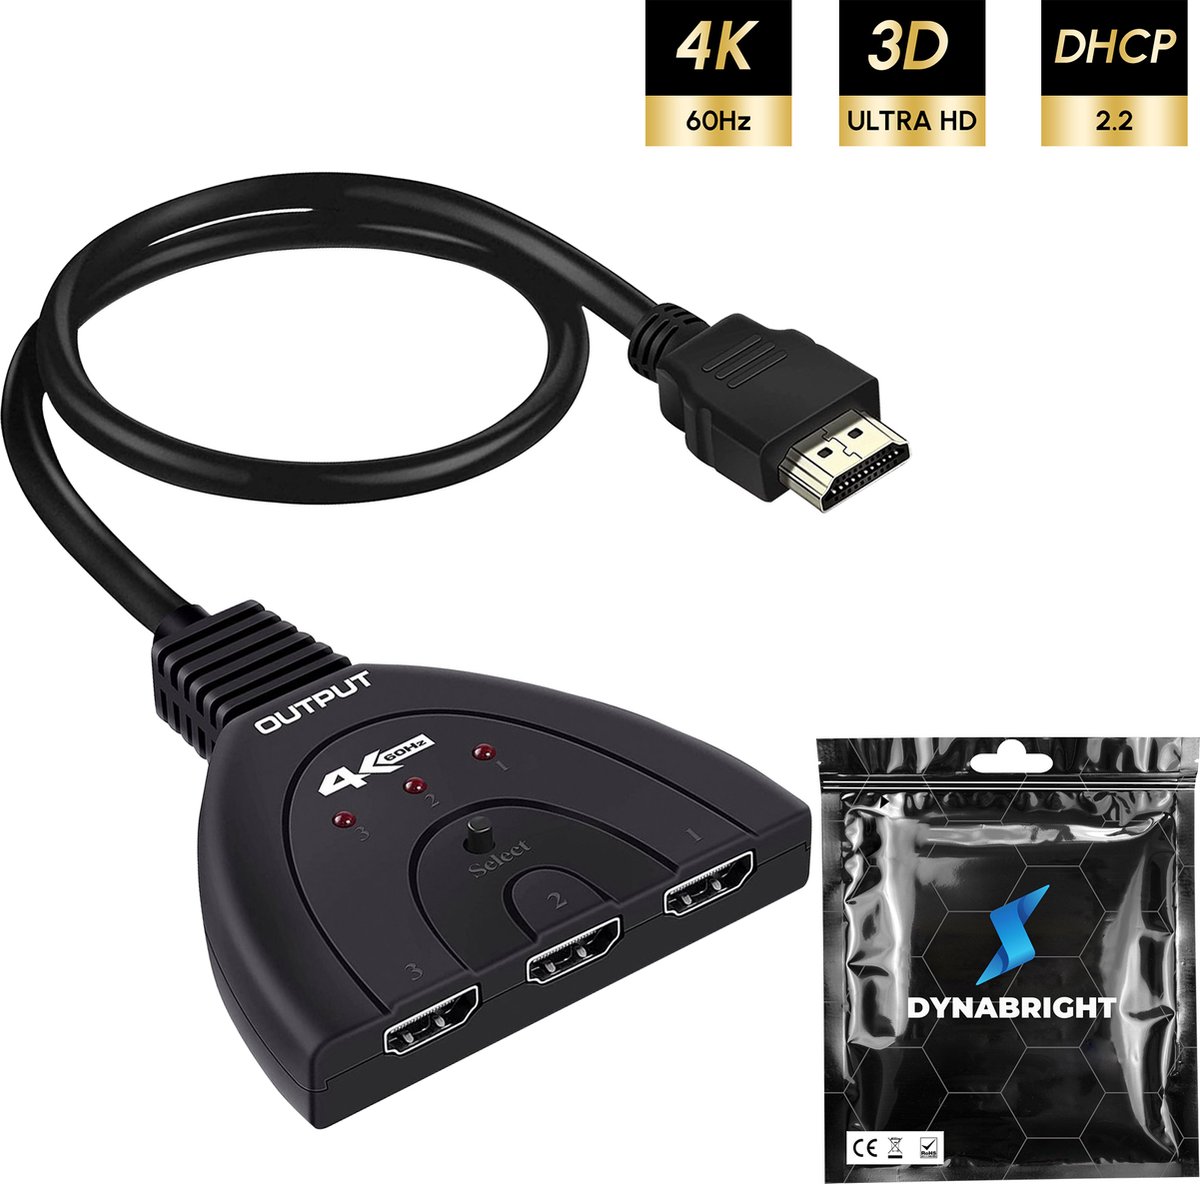 Switch Hdmi 4K Ultra Hd 3 Entrees Et 1 Sortie Avec Cable 4K 3In 1Out Cable